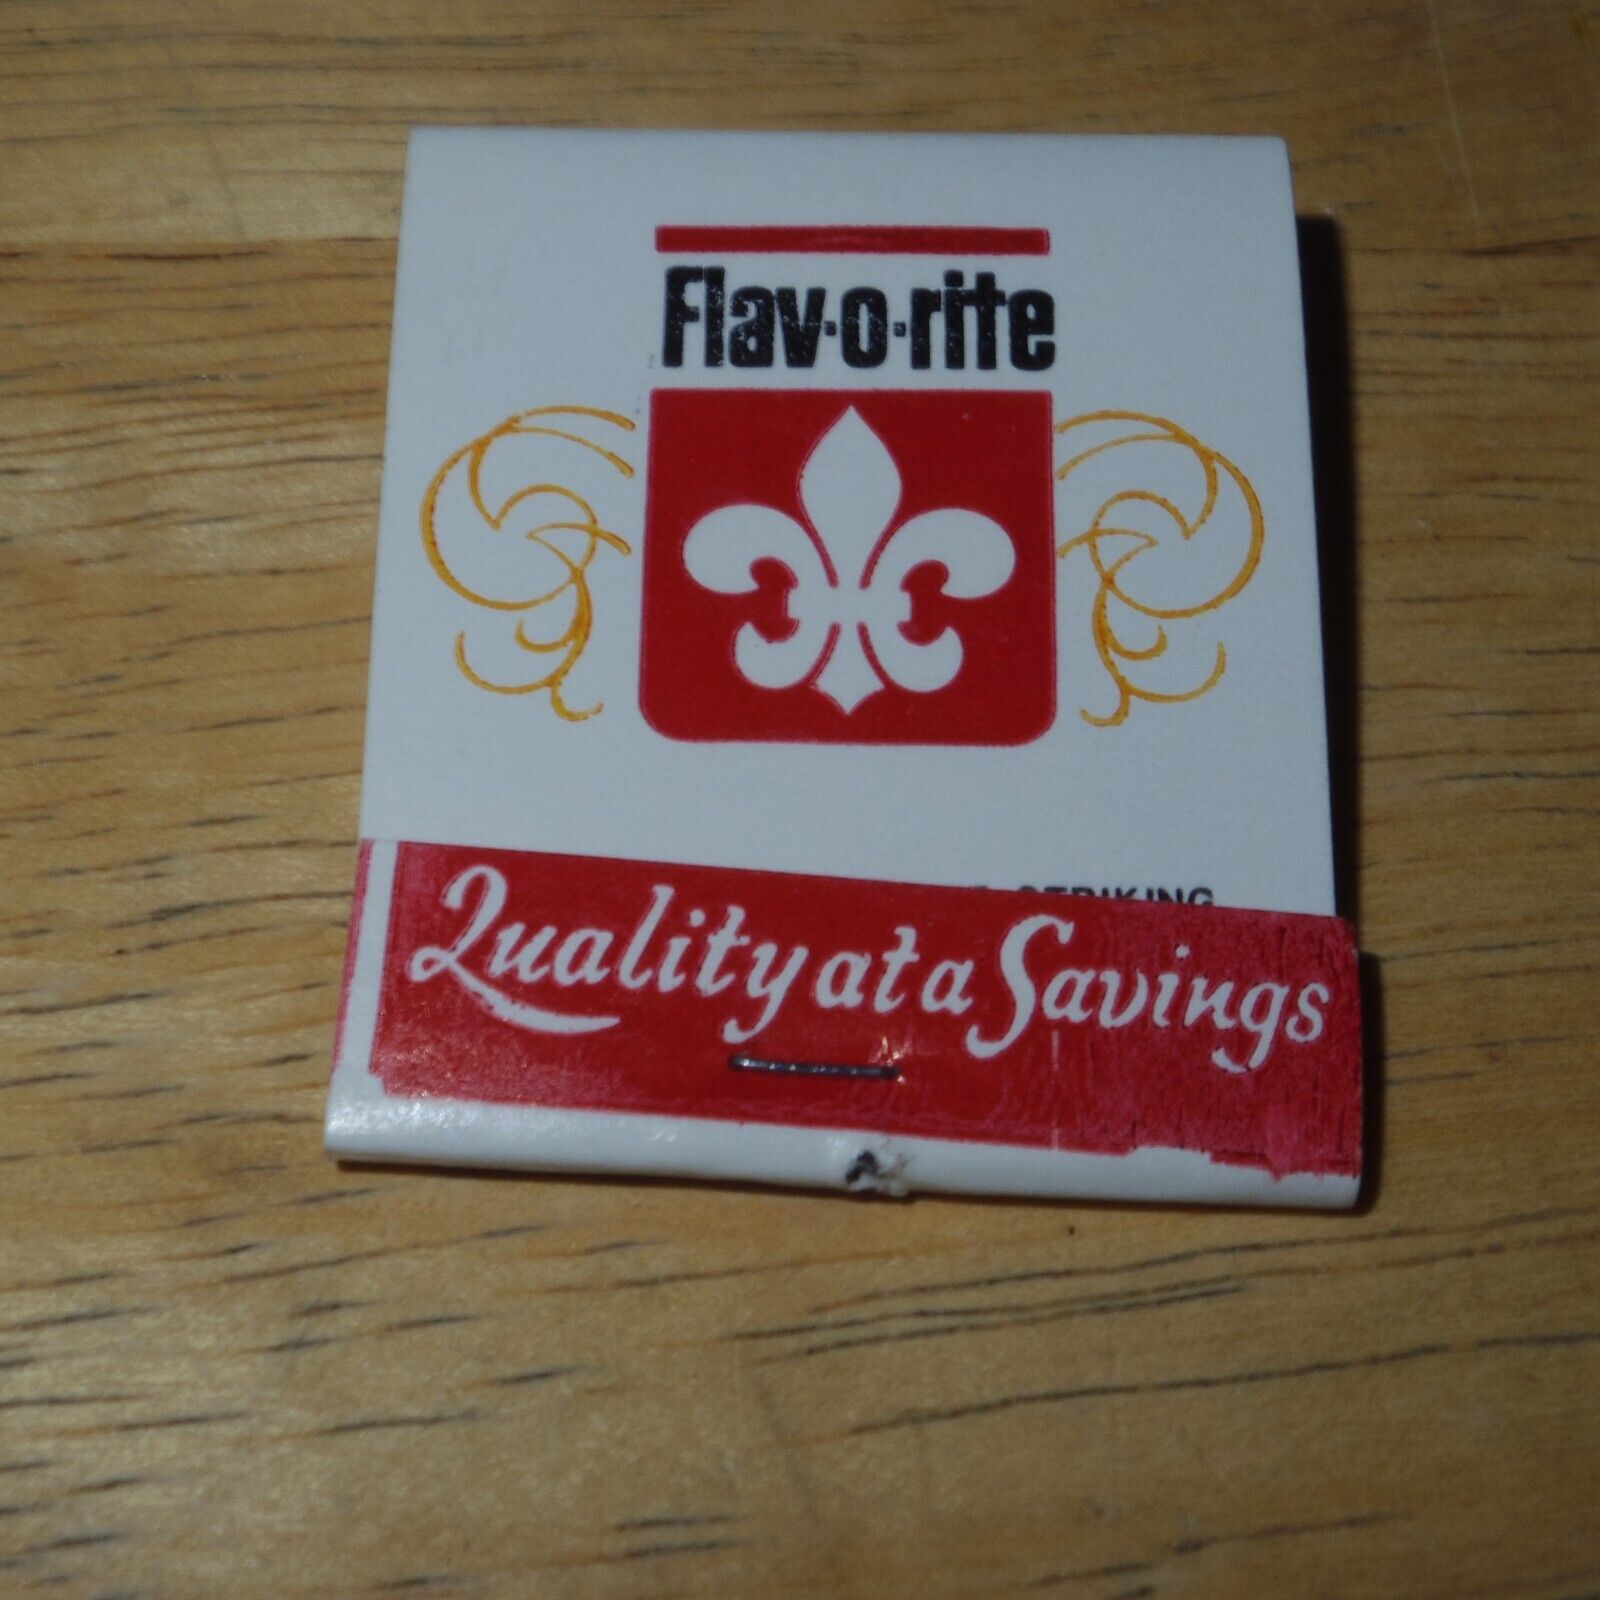 Vintage Flav-o-rite Quality at a Savings Matchbook Full Unstruck White Red Black